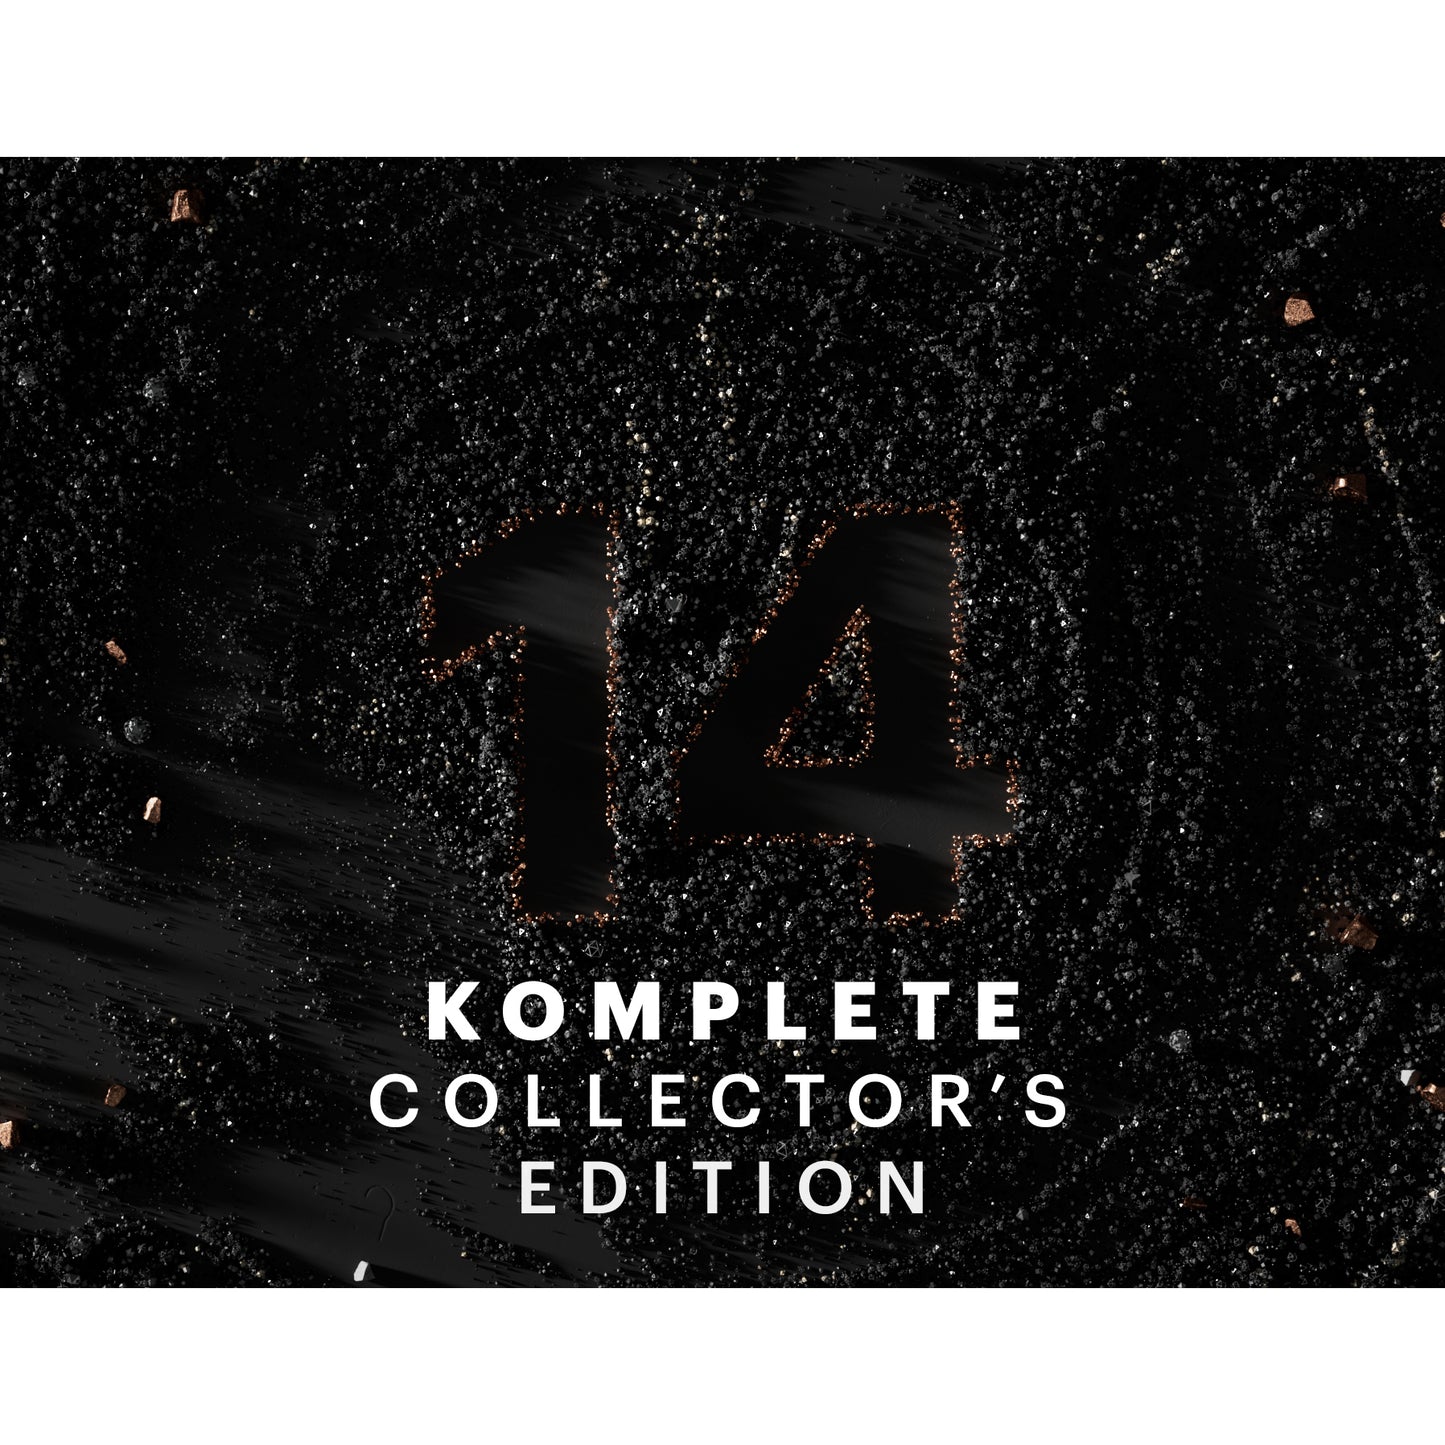 Native Instruments KOMPLETE 14 COLLECTOR’S EDITION Virtual Instruments & Plugins